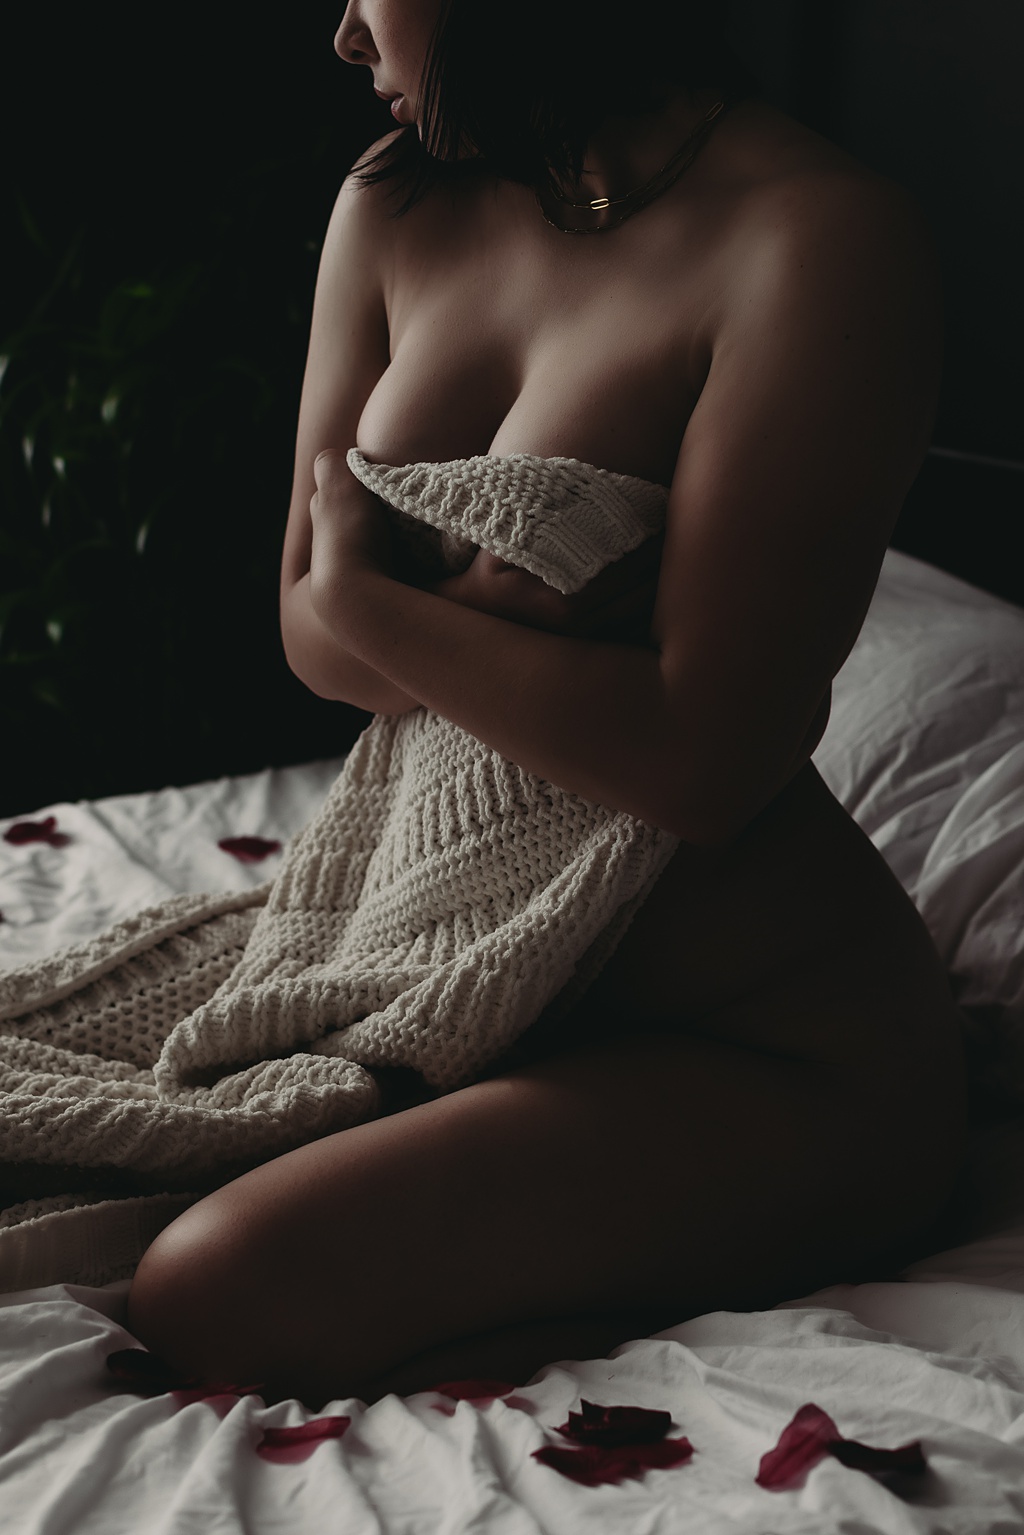 close up boudoir photo of woman wrapped in a blanket